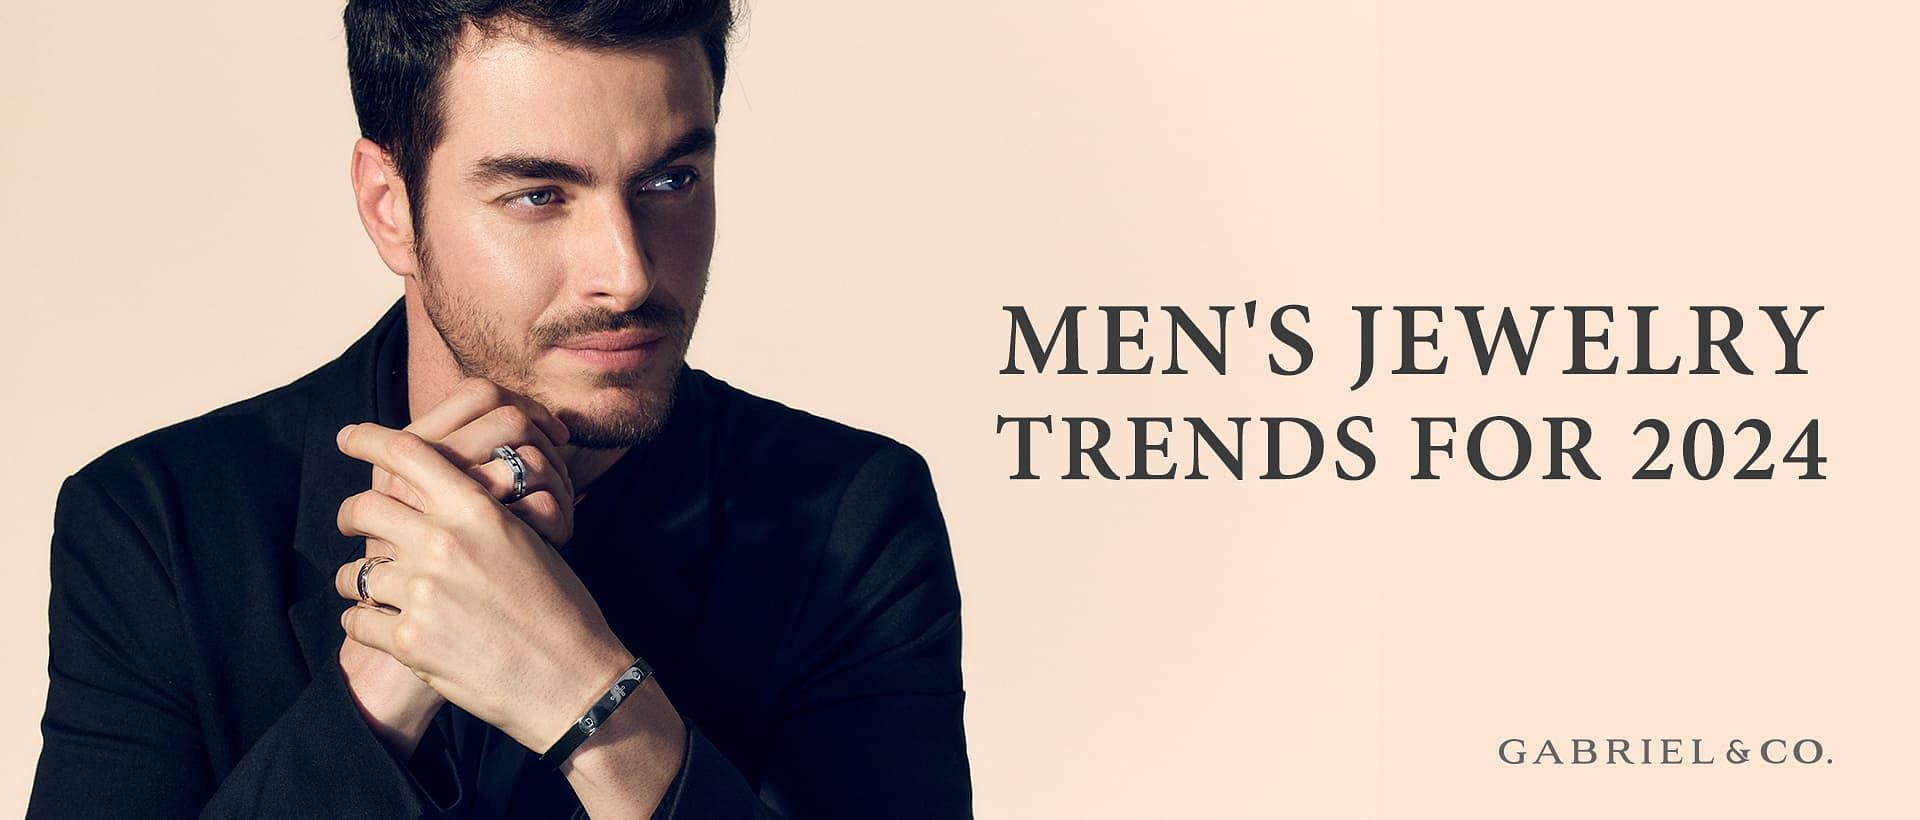 Men's Jewelry Trends That Will Reign Supreme in 2024